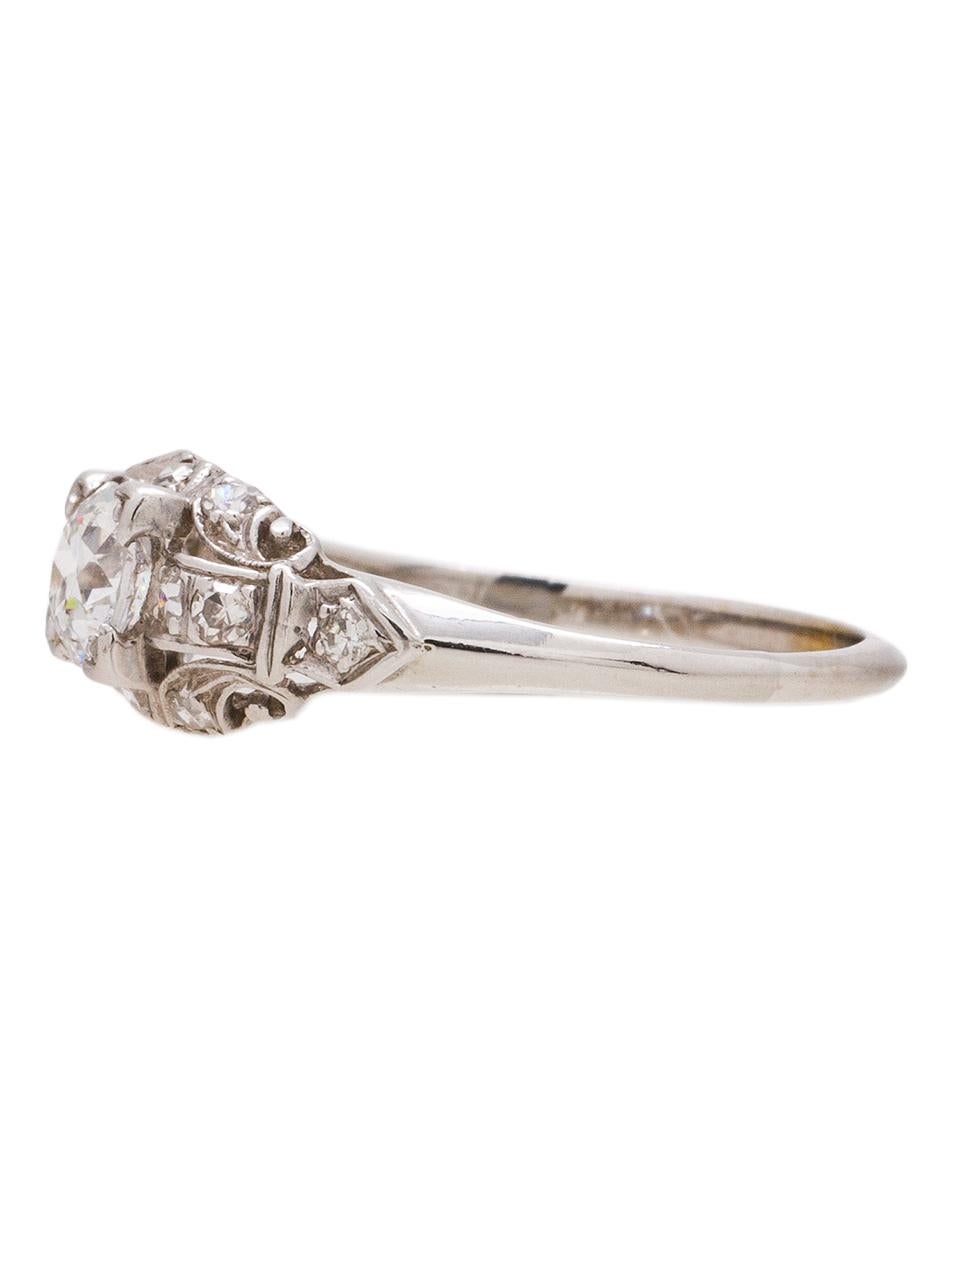 This engagement ring is set in 18k white gold with a beautiful 0.46 carat old European cut diamond, H color and VS2 clarity. With 12 accent diamonds adding 0.24 carat. Nice detail with open work with scroll design. Precious and unique ring. Size